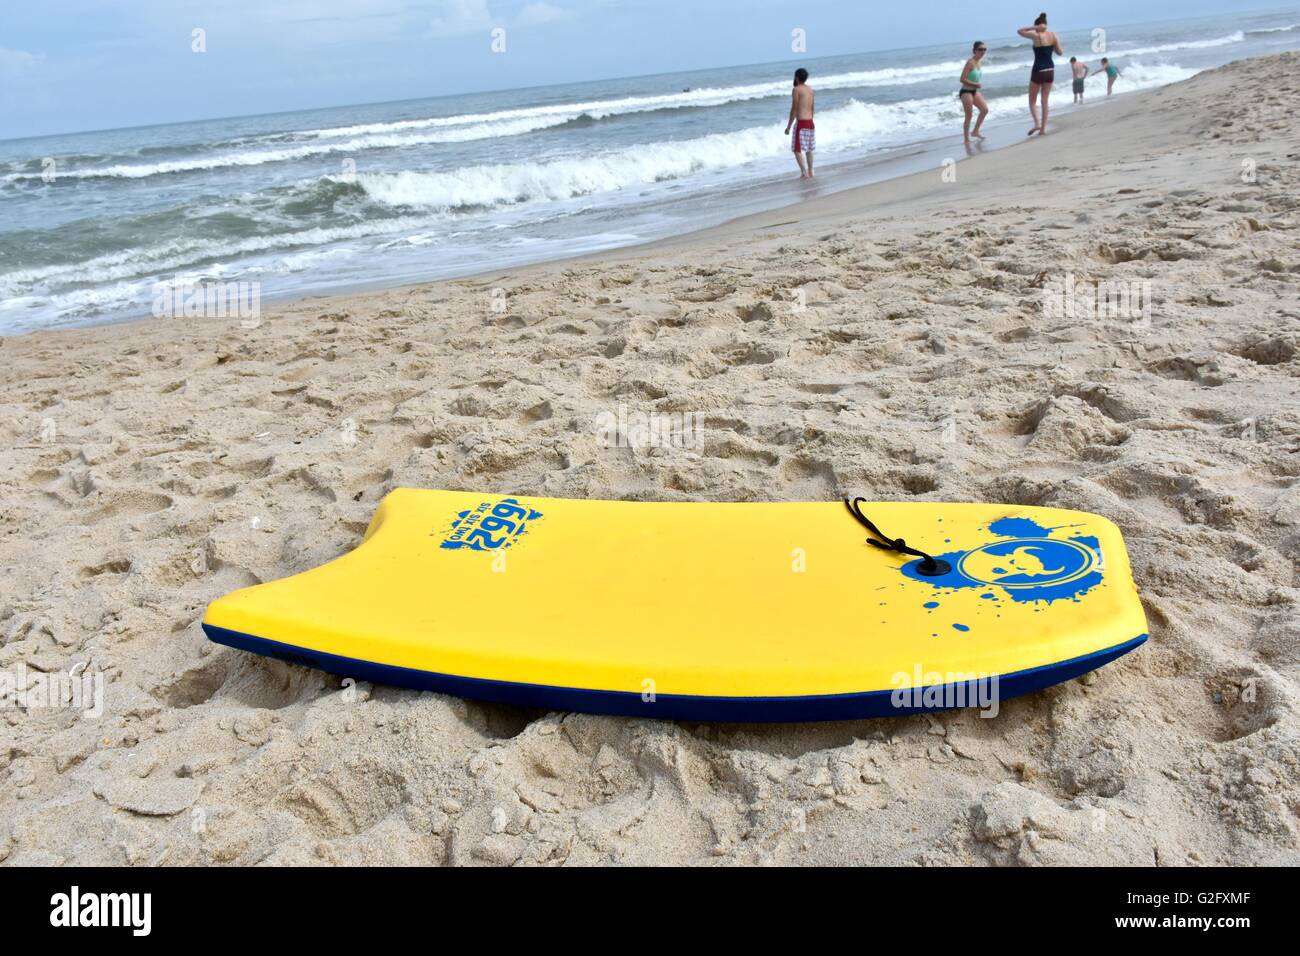 A yellow boogie board laying in the sand on the beach Stock Photo - Alamy